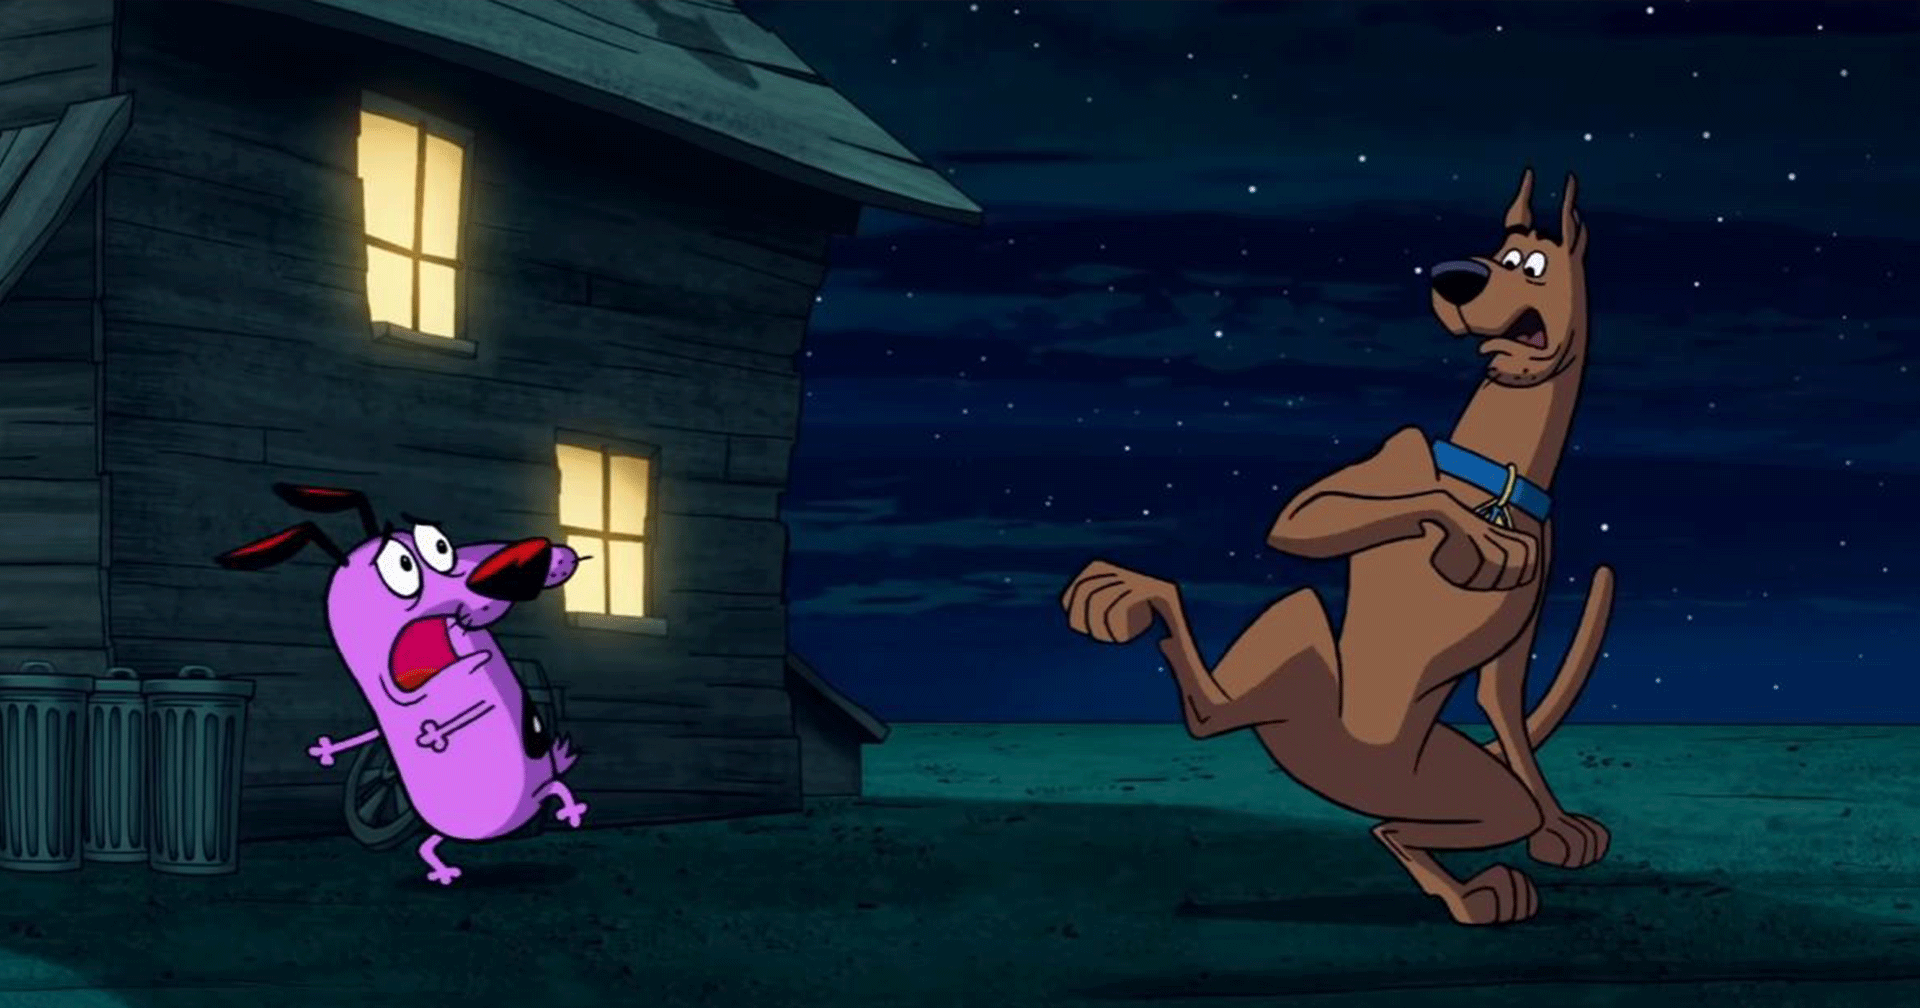 Straight Outta Nowhere: Scooby Doo Meets Courage the Cowardly Dog